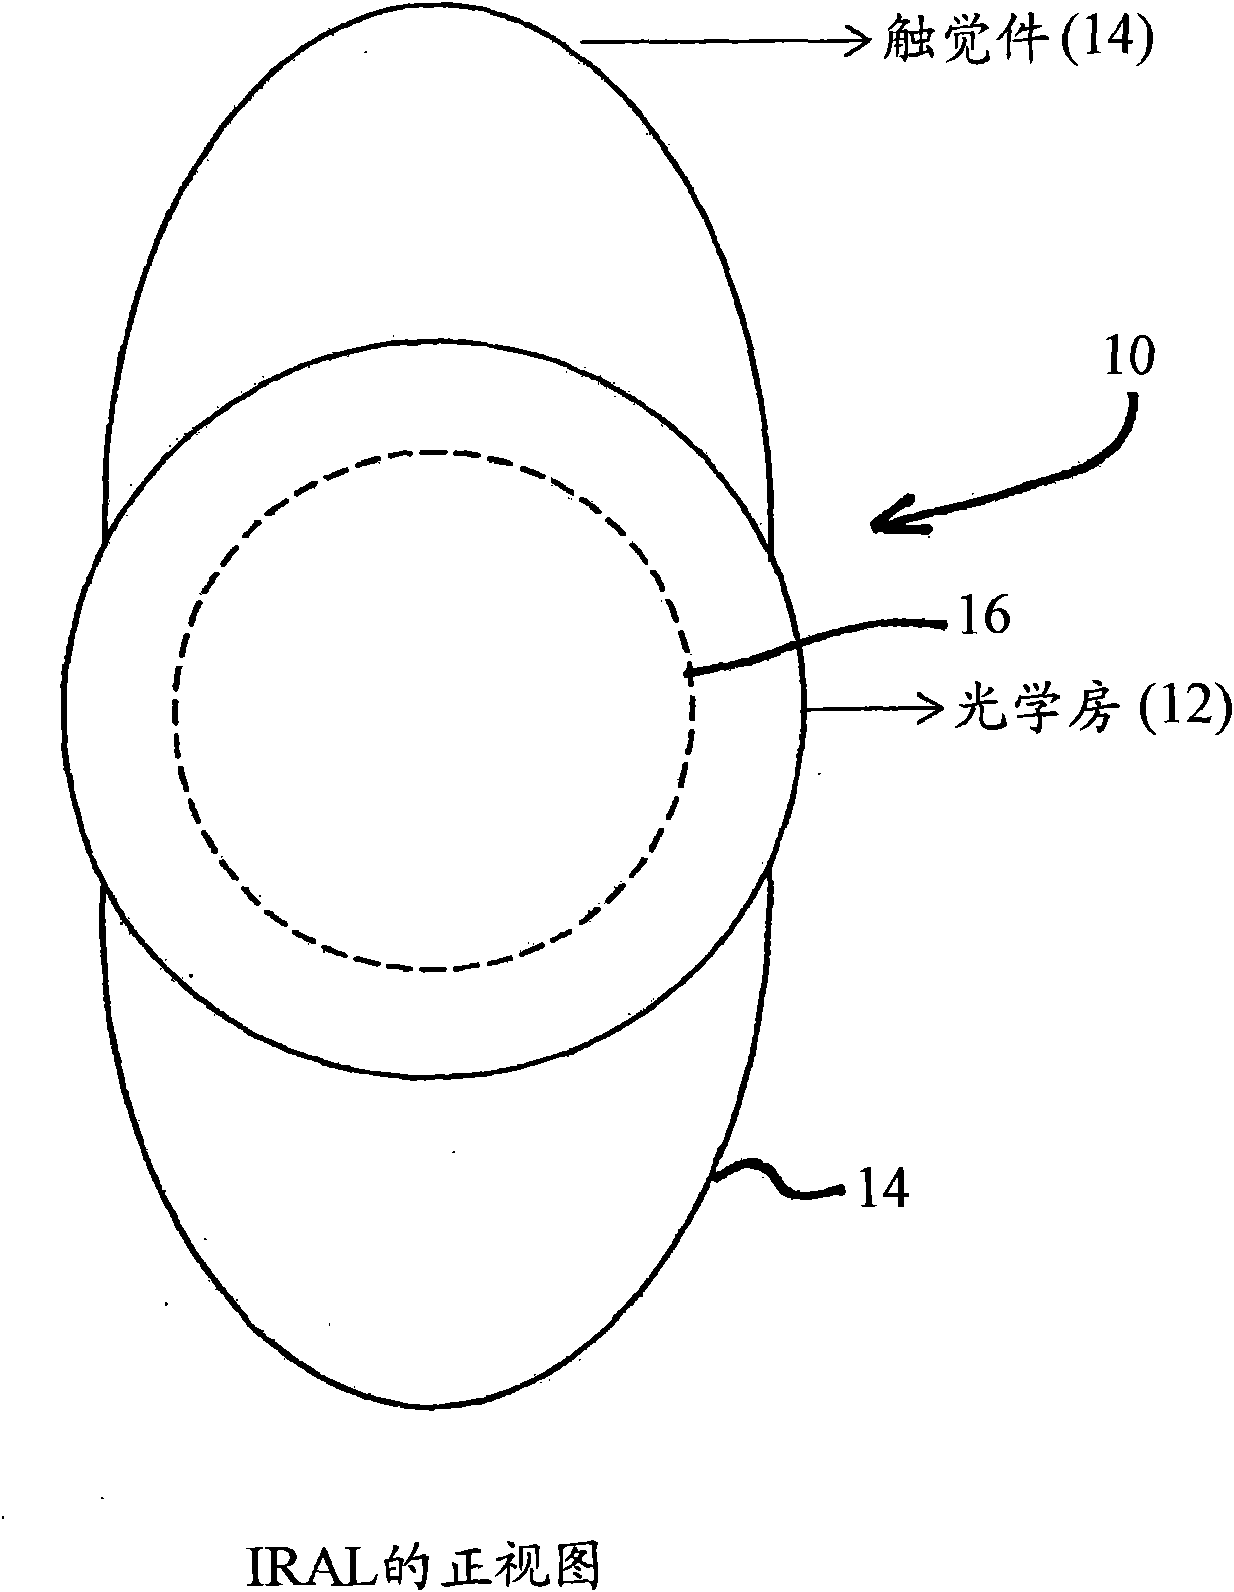 Interfacial refraction accommodating lens (iral)